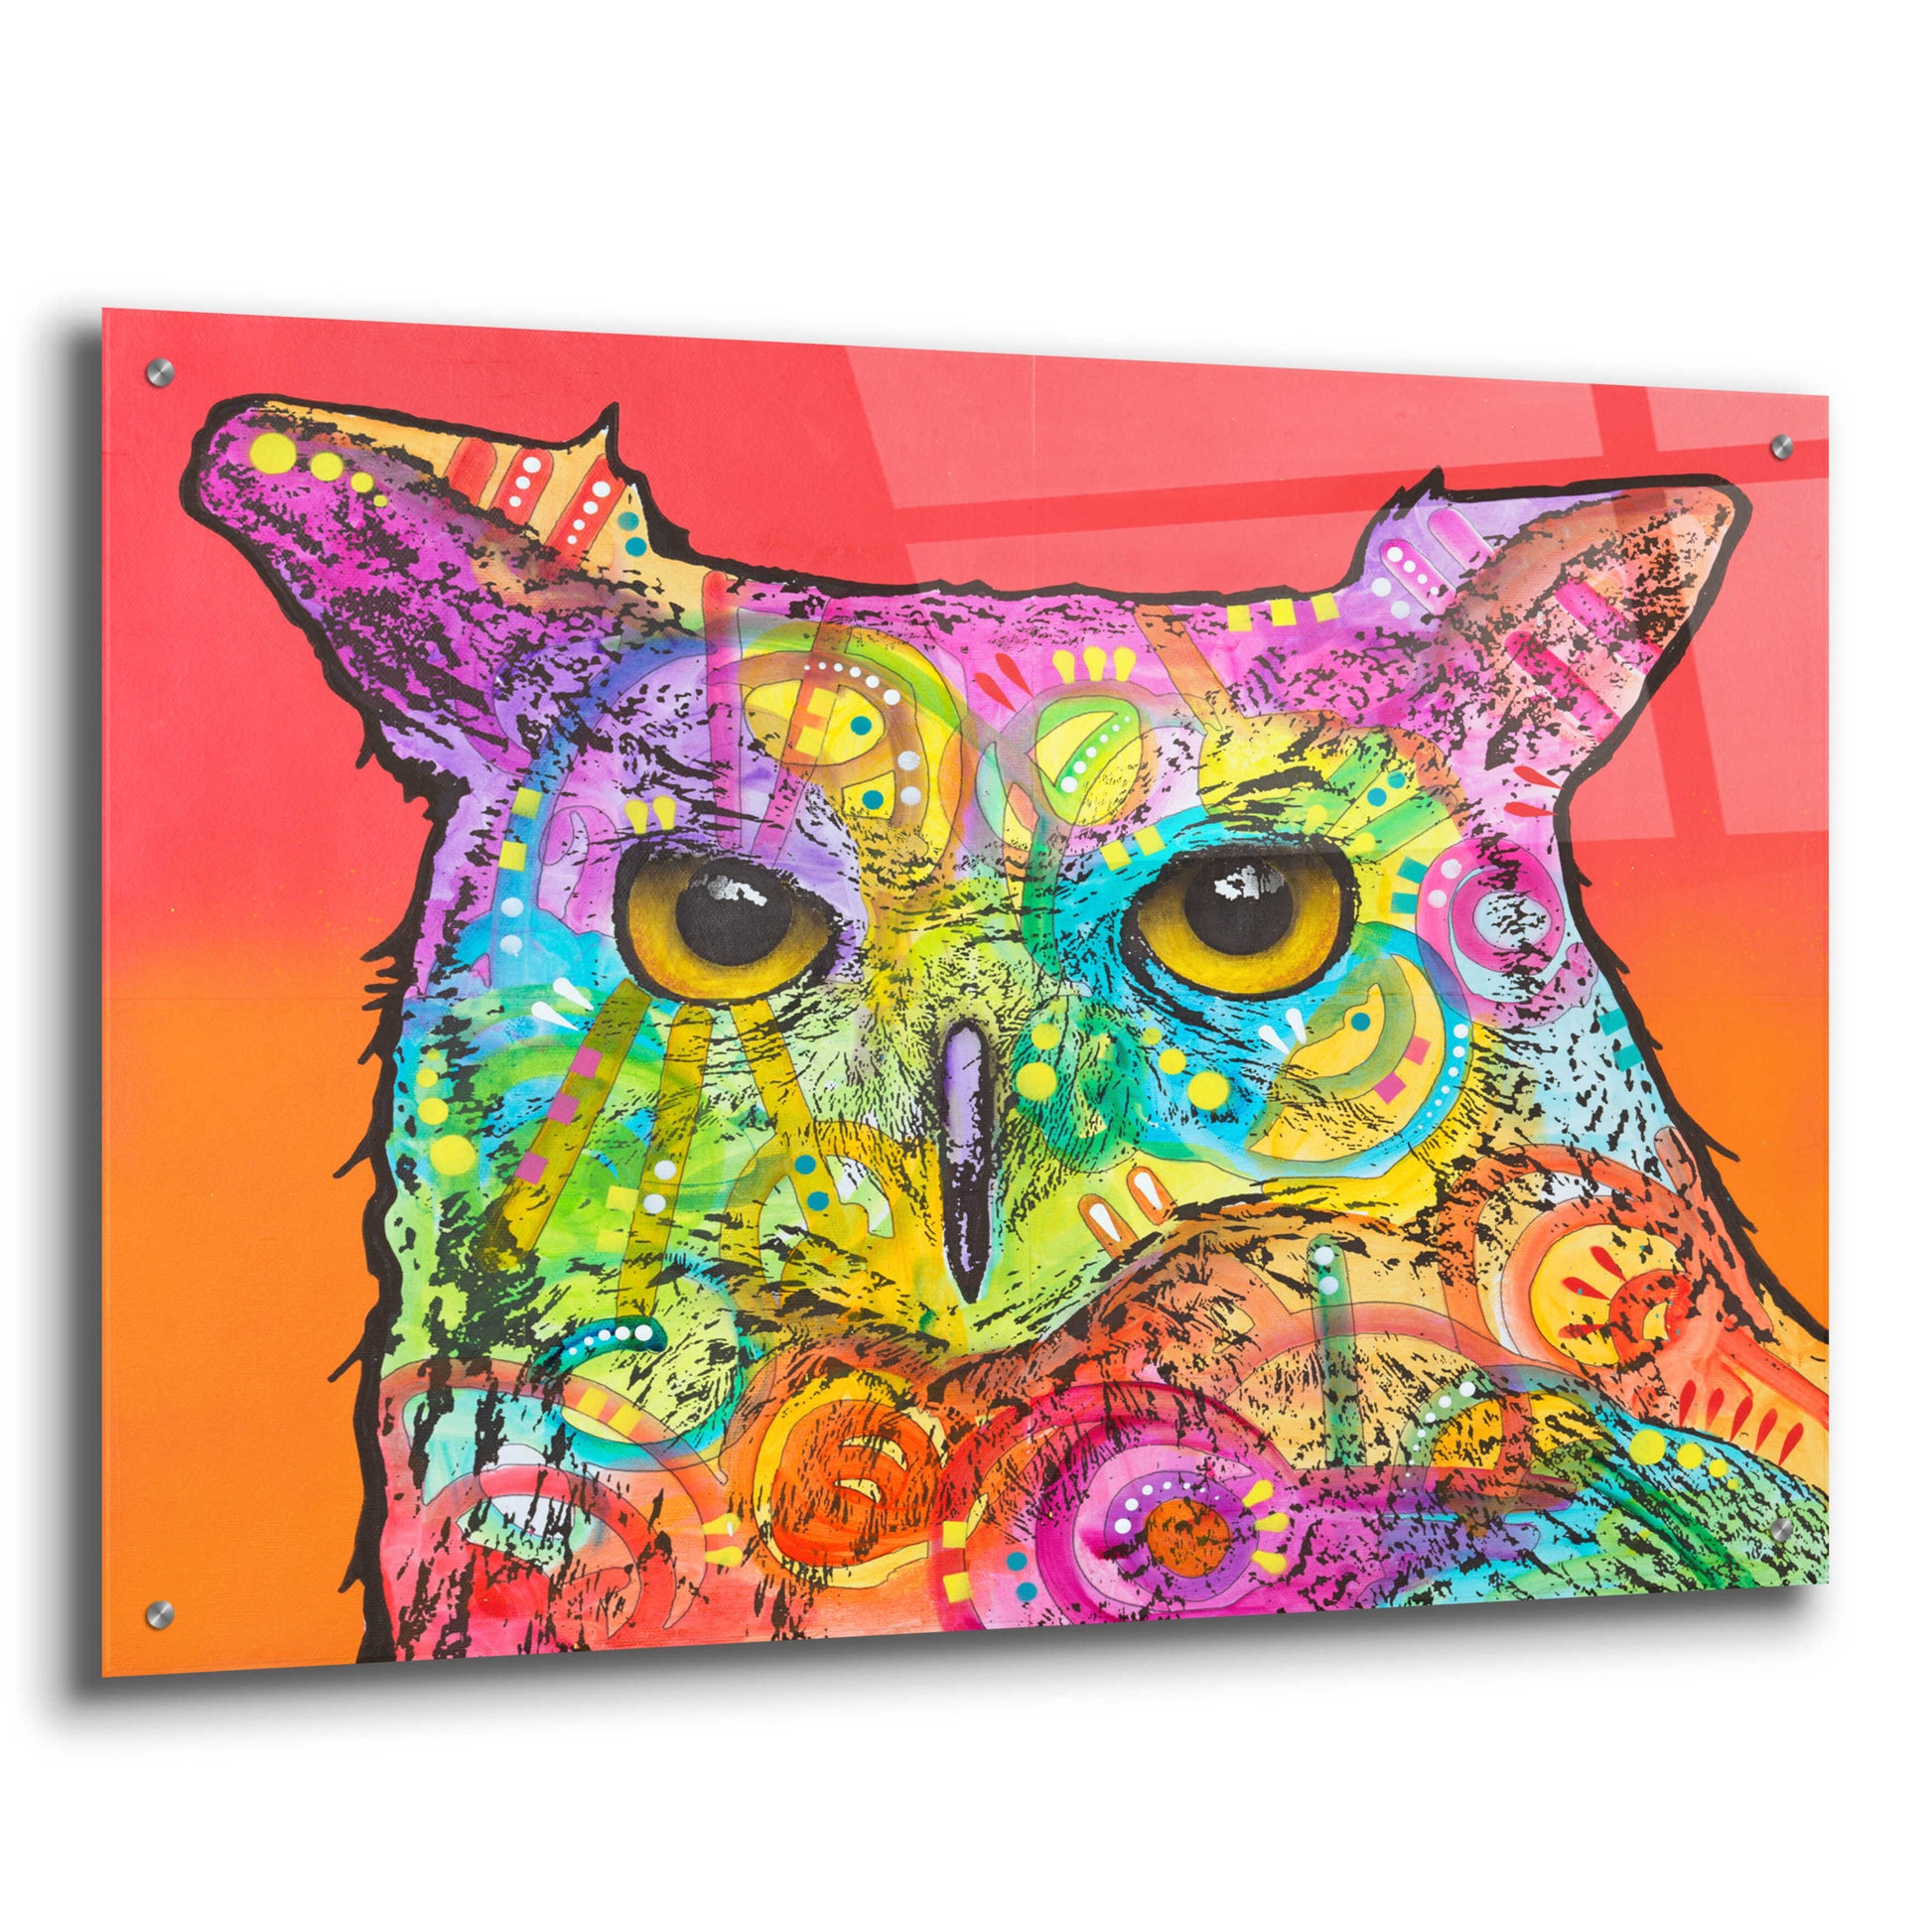 Epic Art 'Red Owl' by Dean Russo, Acrylic Glass Wall Art,36x24